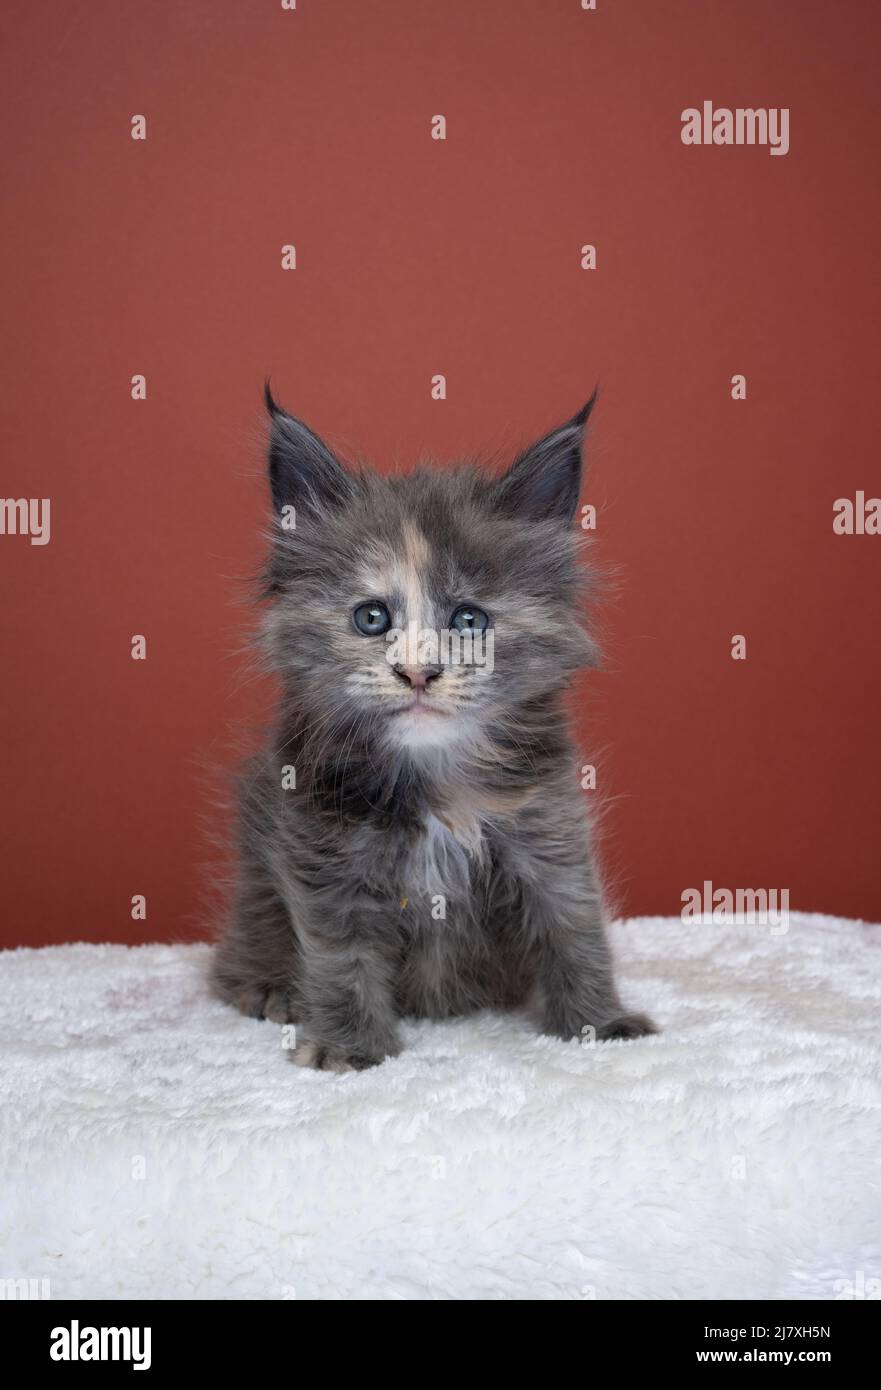 cute tortie maine coon kitten portrait looking at camera on red brown background with copy space Stock Photo